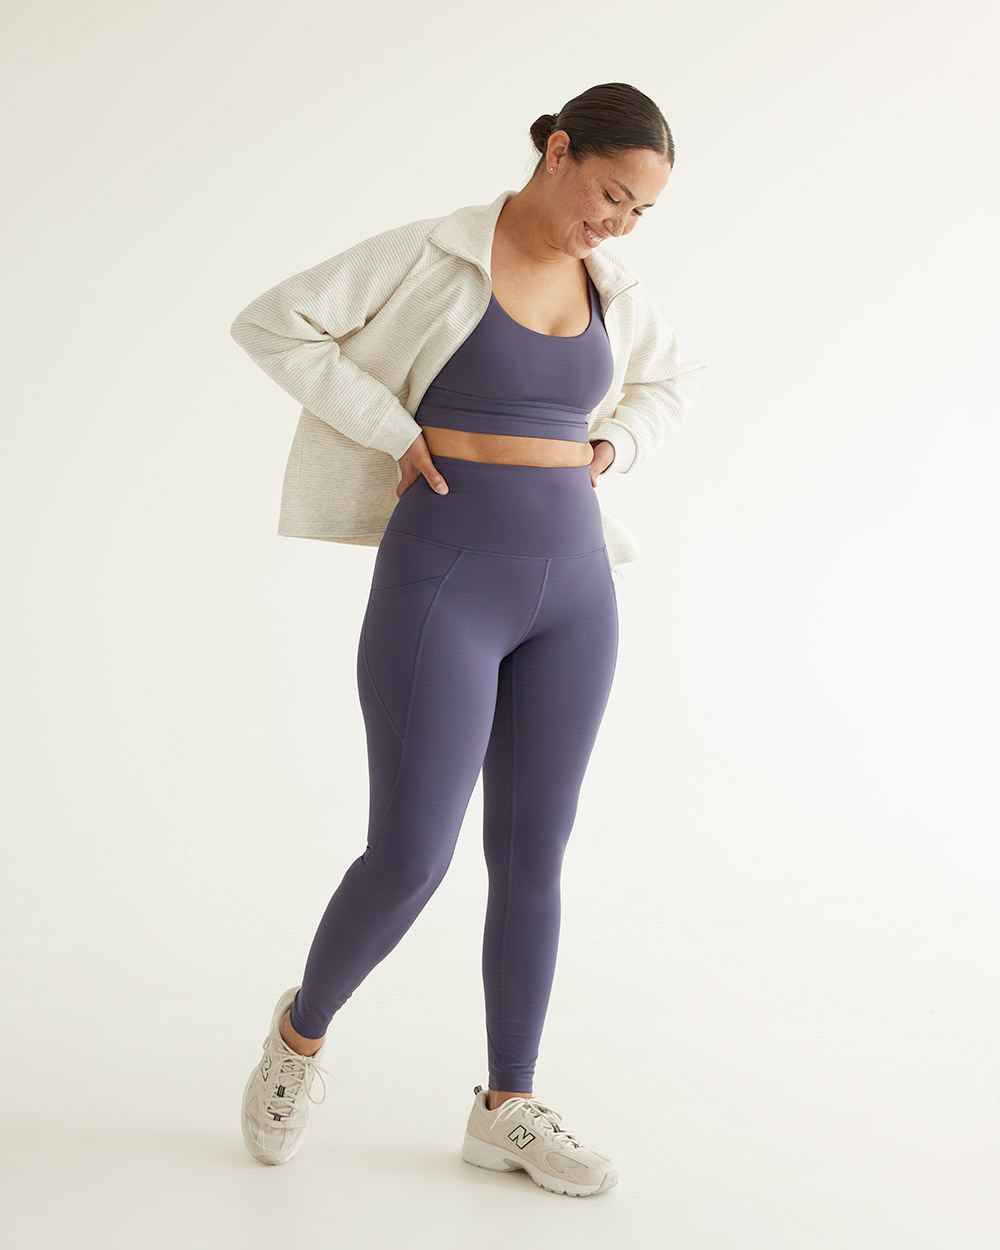 Step Aside Athletic Leggings with Pockets - Full Size Run - Charisma